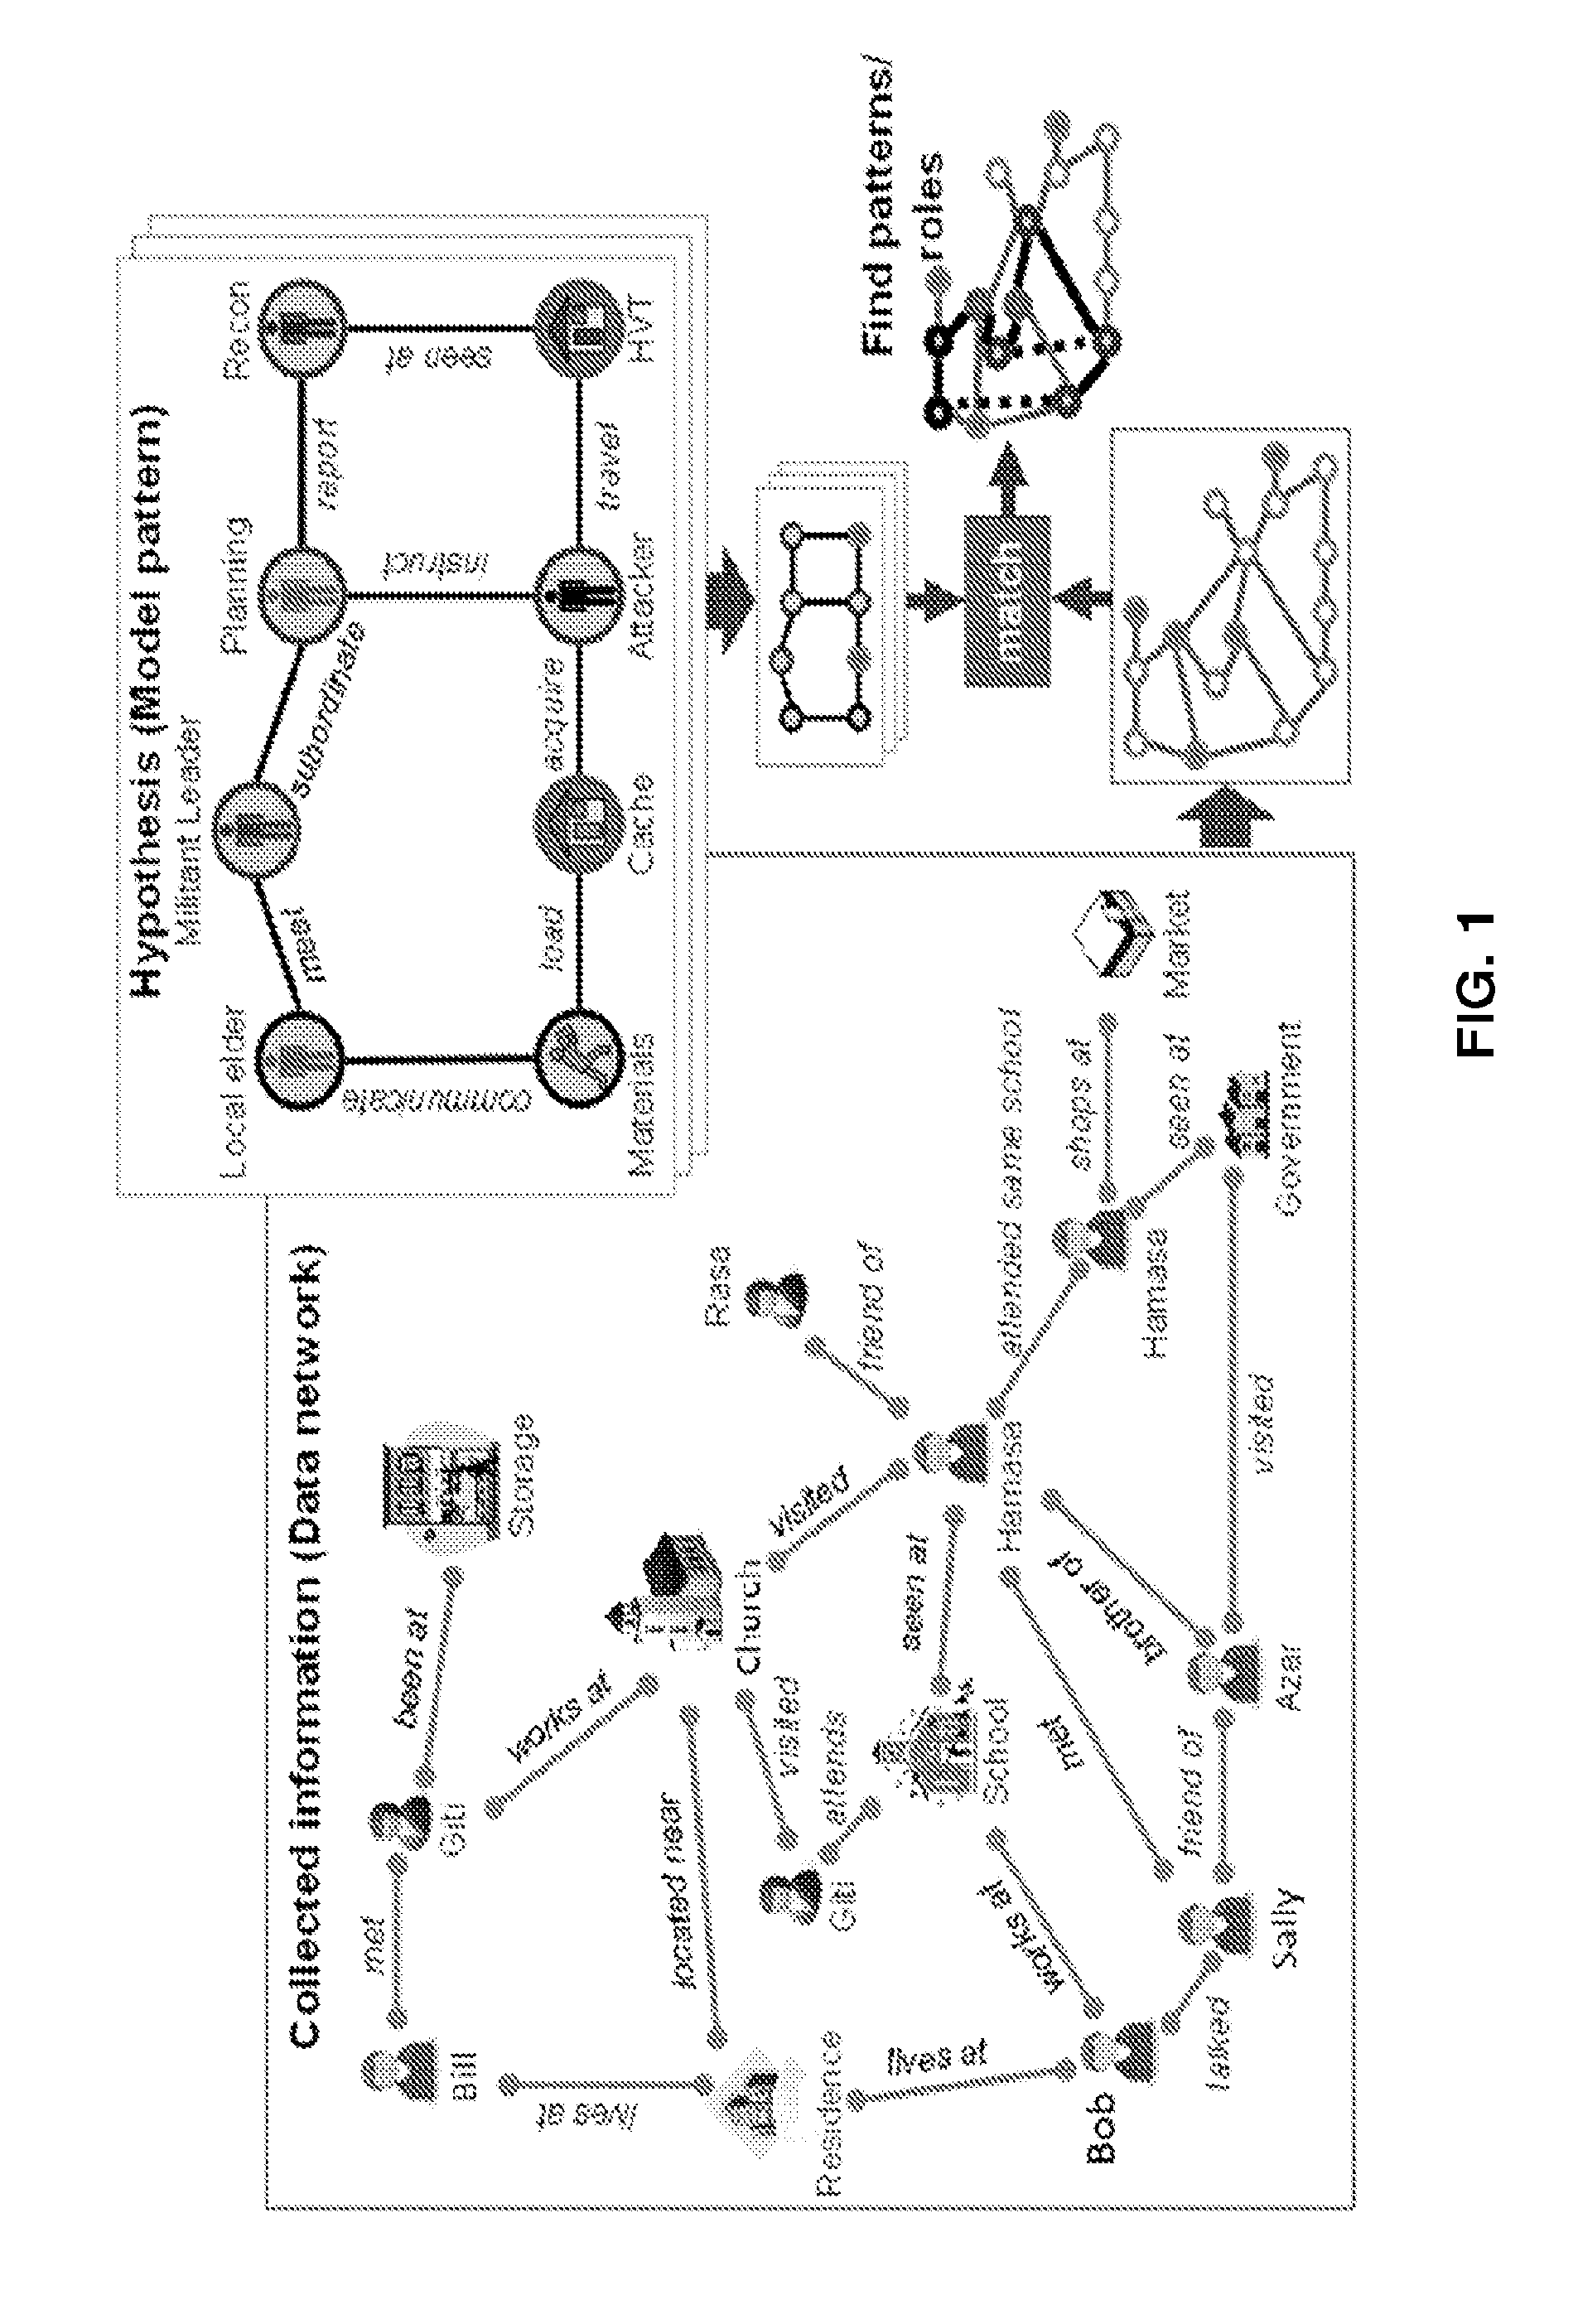 Systems and methods for network pattern matching